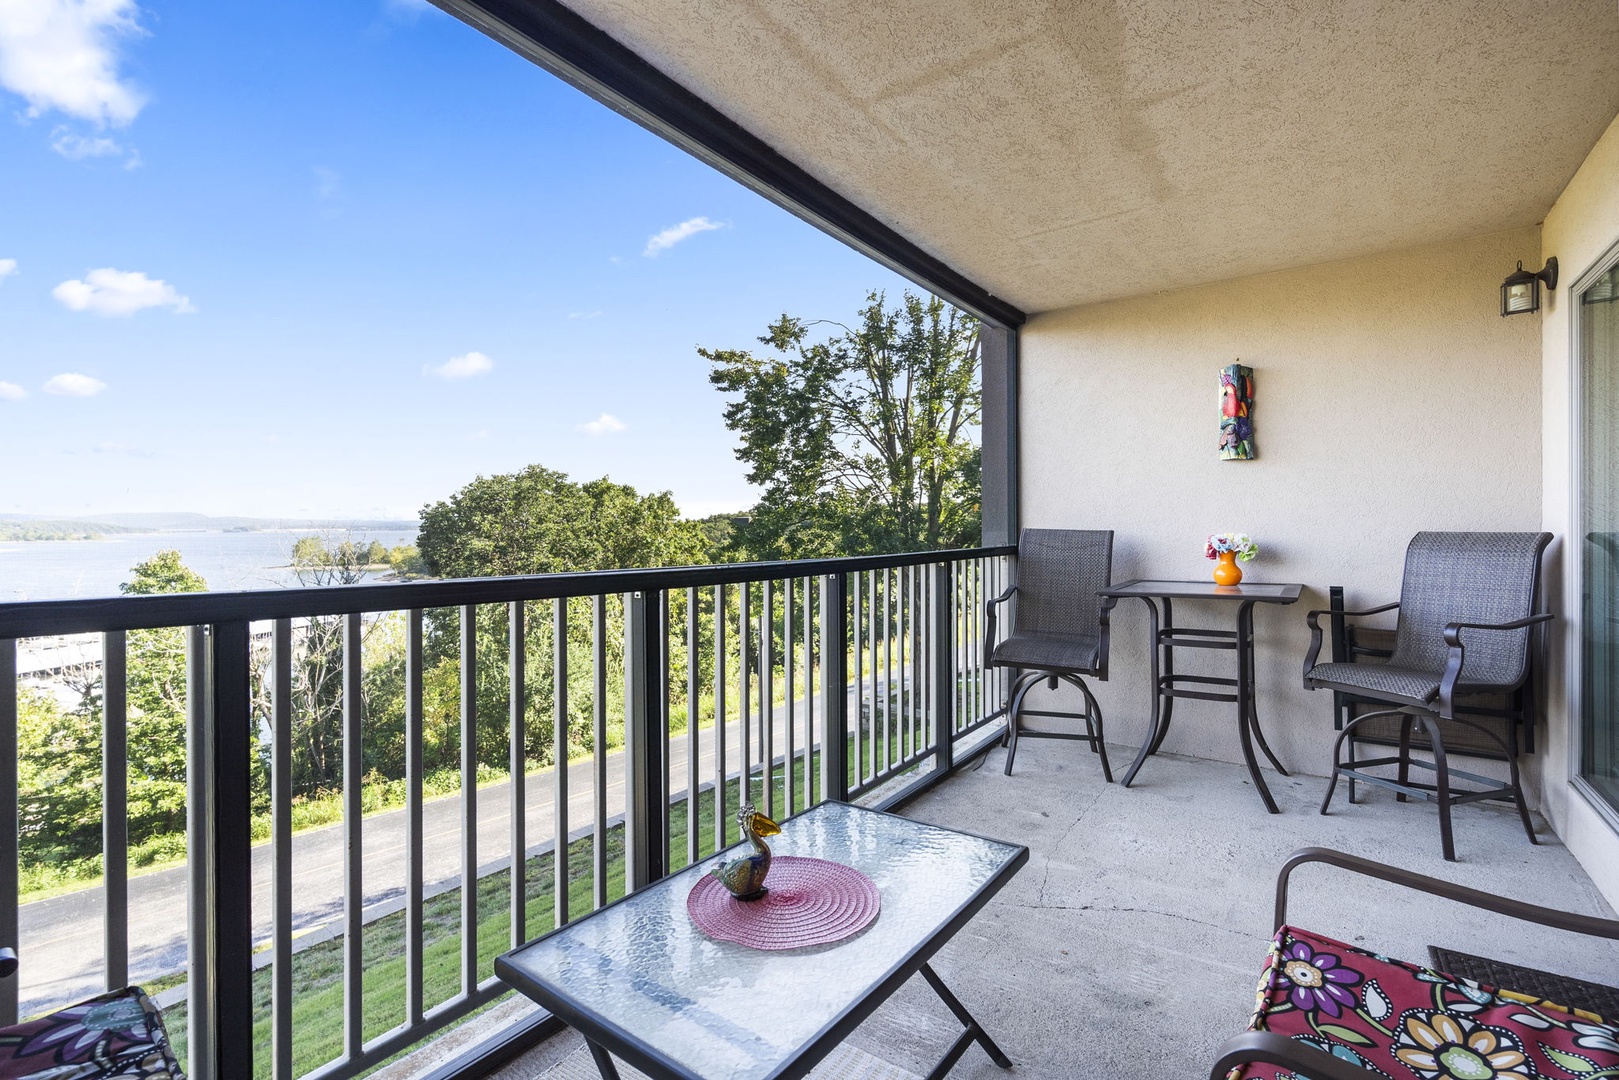 Lounge or dine with gorgeous lake views on the back deck